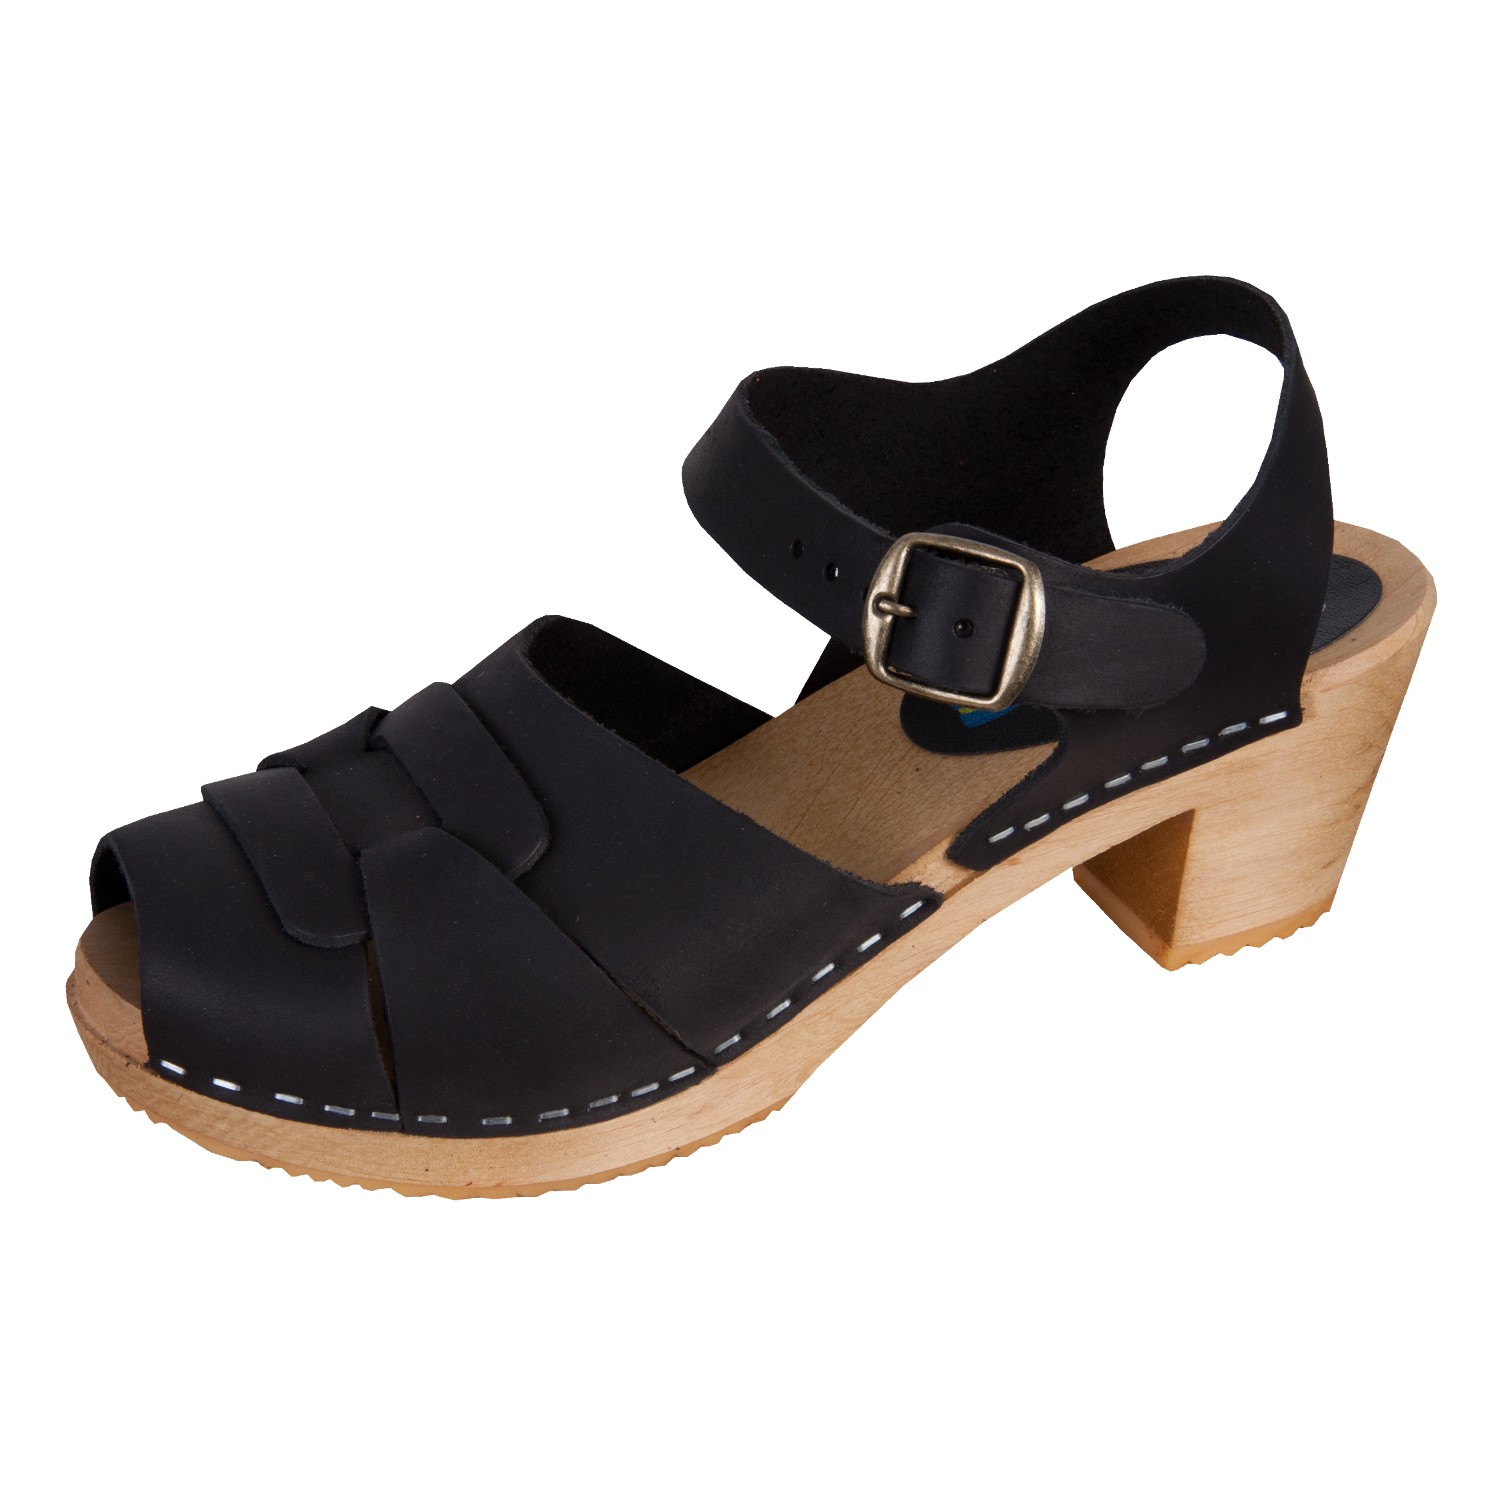 Moheda 3008 Ally Black - Sandals - Everyday shoes - Shoes - Timarco.co.uk